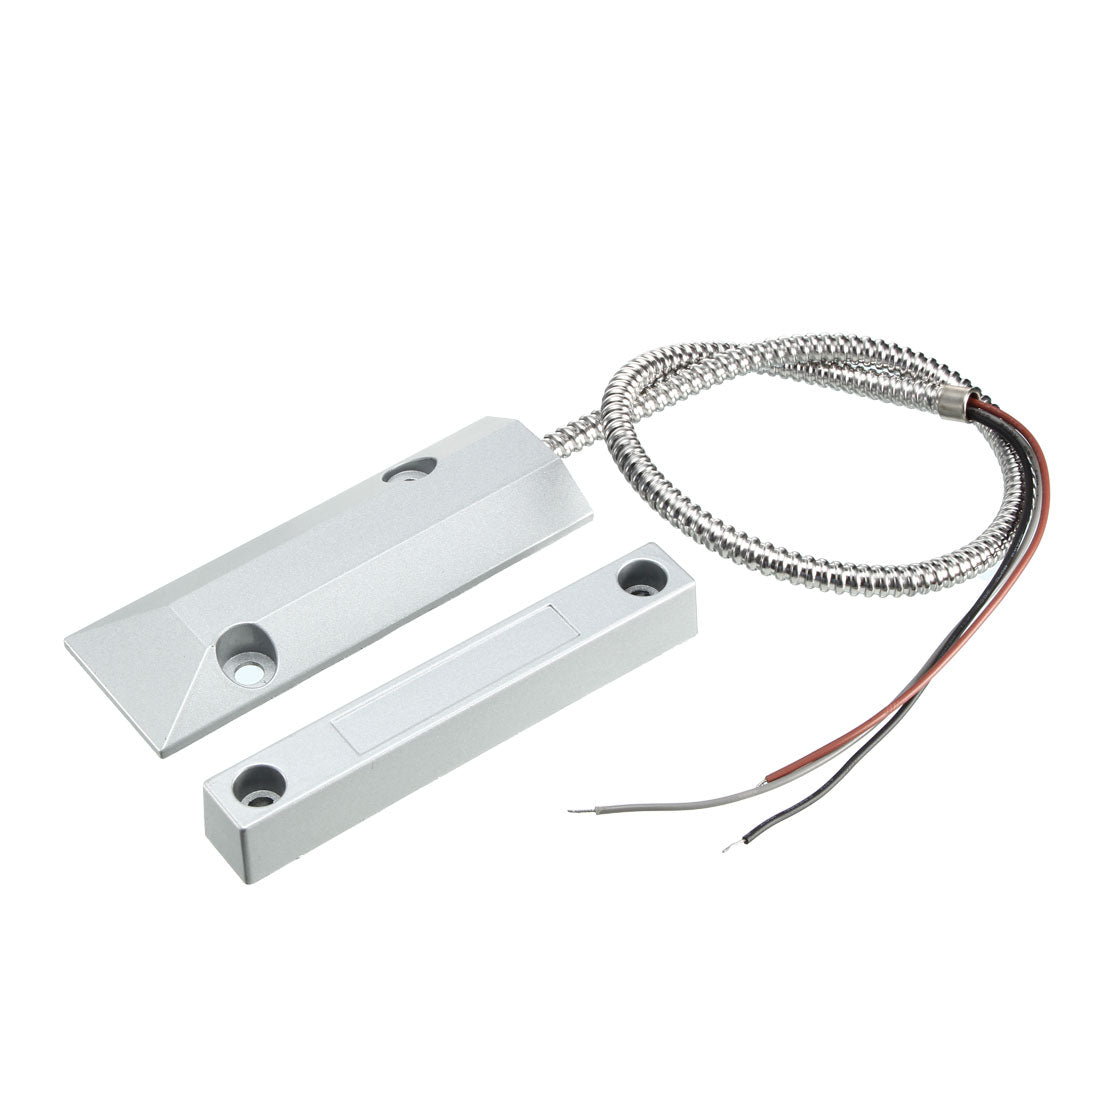 uxcell Uxcell OC-55 NO+NC Alarm Security Rolling Gate Garage Door Contact Magnetic Reed Switch